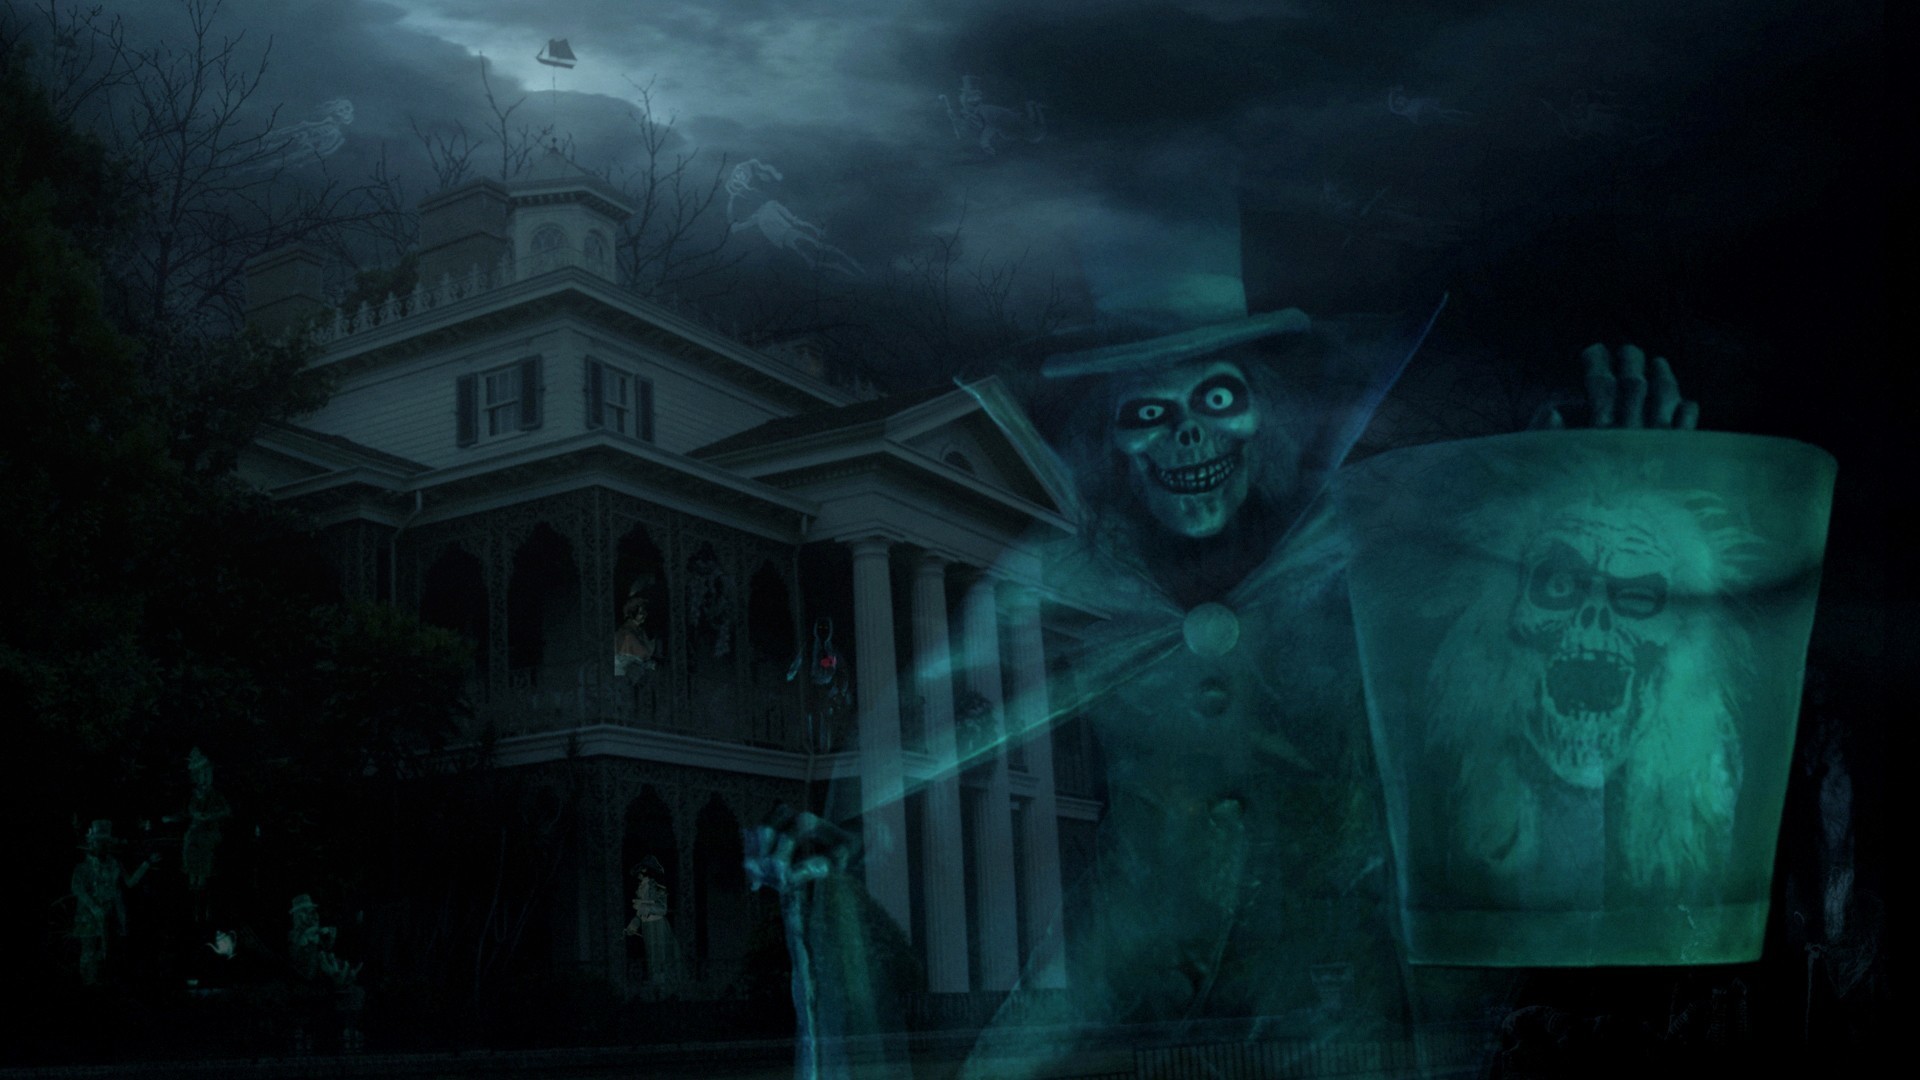 1920x1080  A Haunted House 2 Wallpaper - Original size, download now.